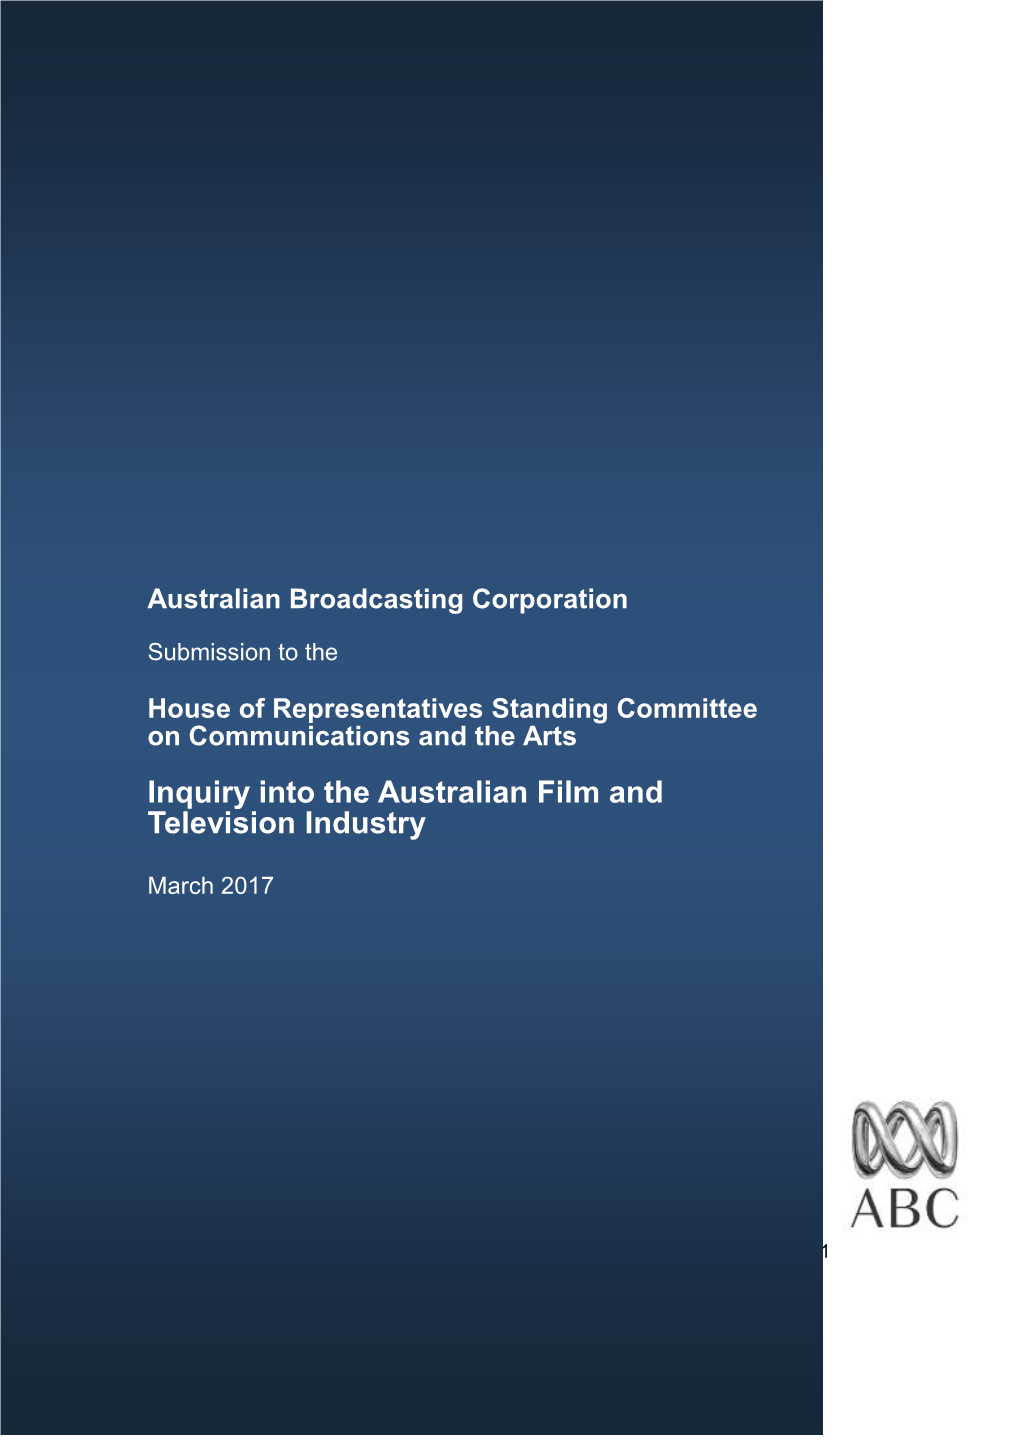 Inquiry Into the Australian Film and Television Industry